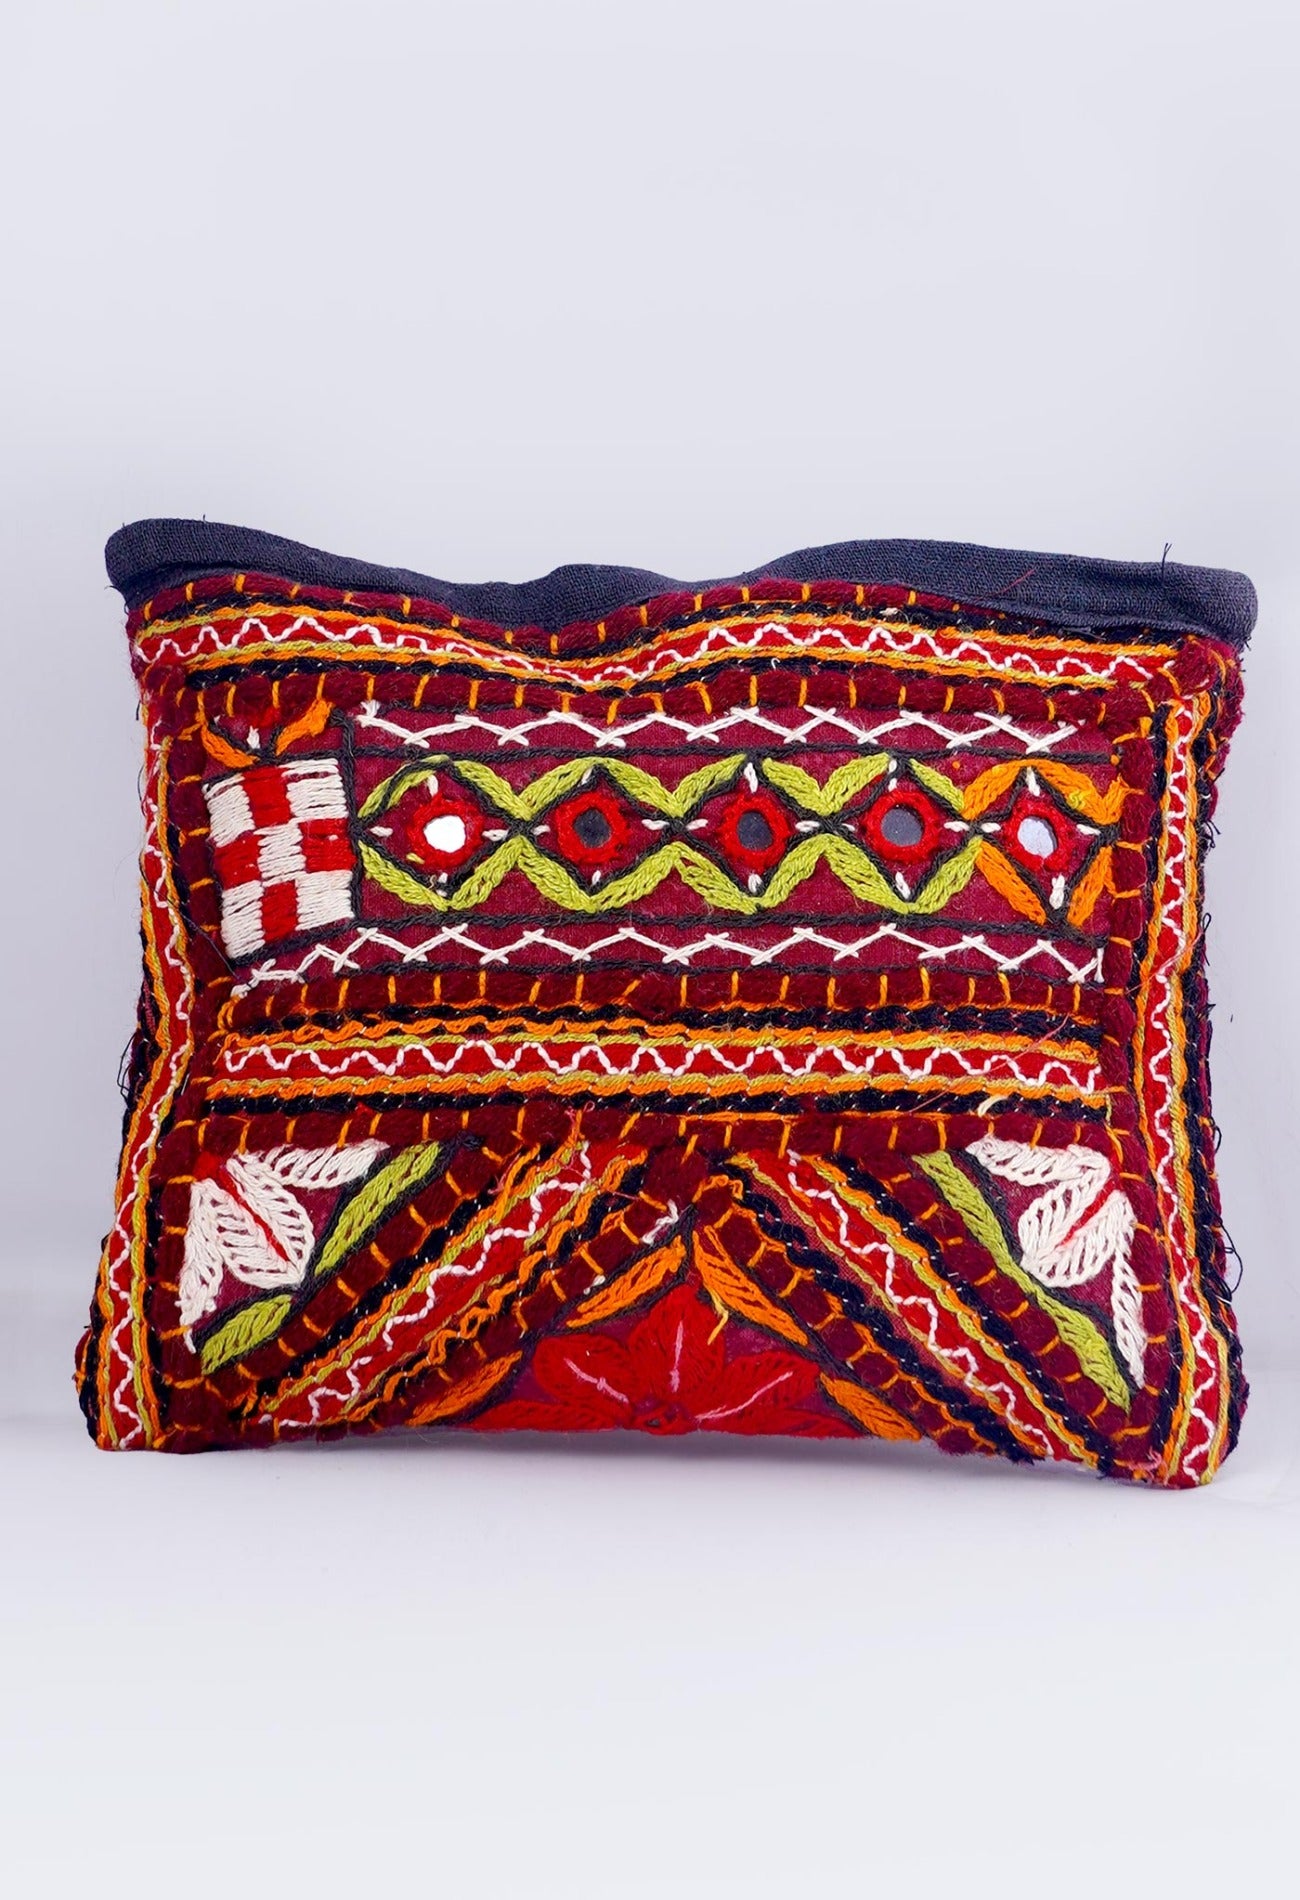 Online Shopping for Maroon Indian Handicraft Embroidered Clutch Bag with Weaving from Rajasthan at Unnatisilks.com India_x000D_
